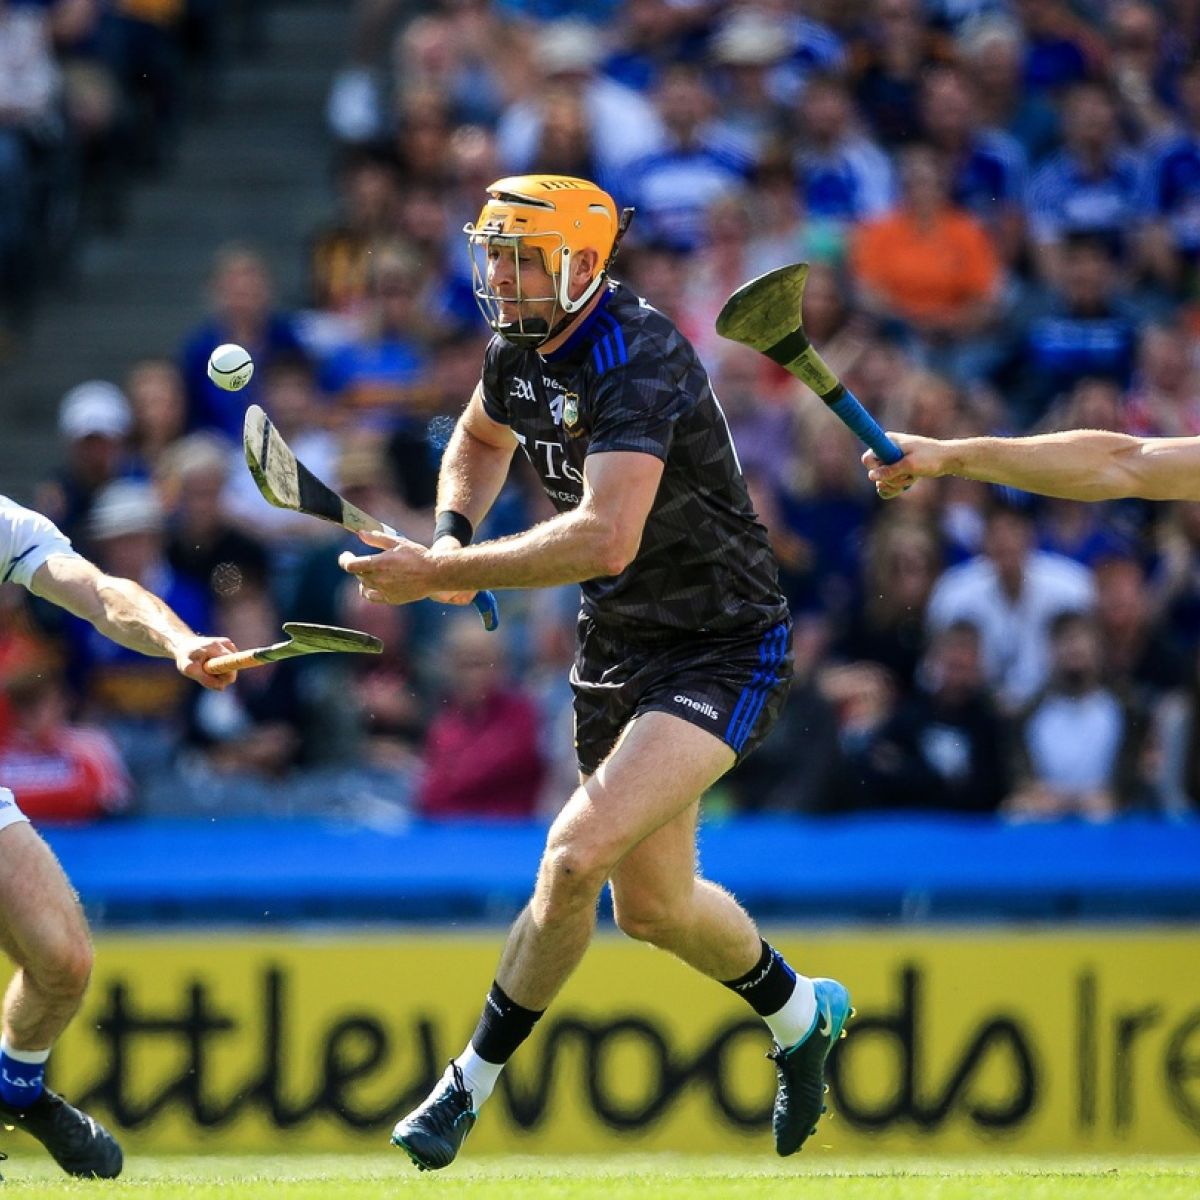 Wexford on the march but Tipperary can shoot their way out